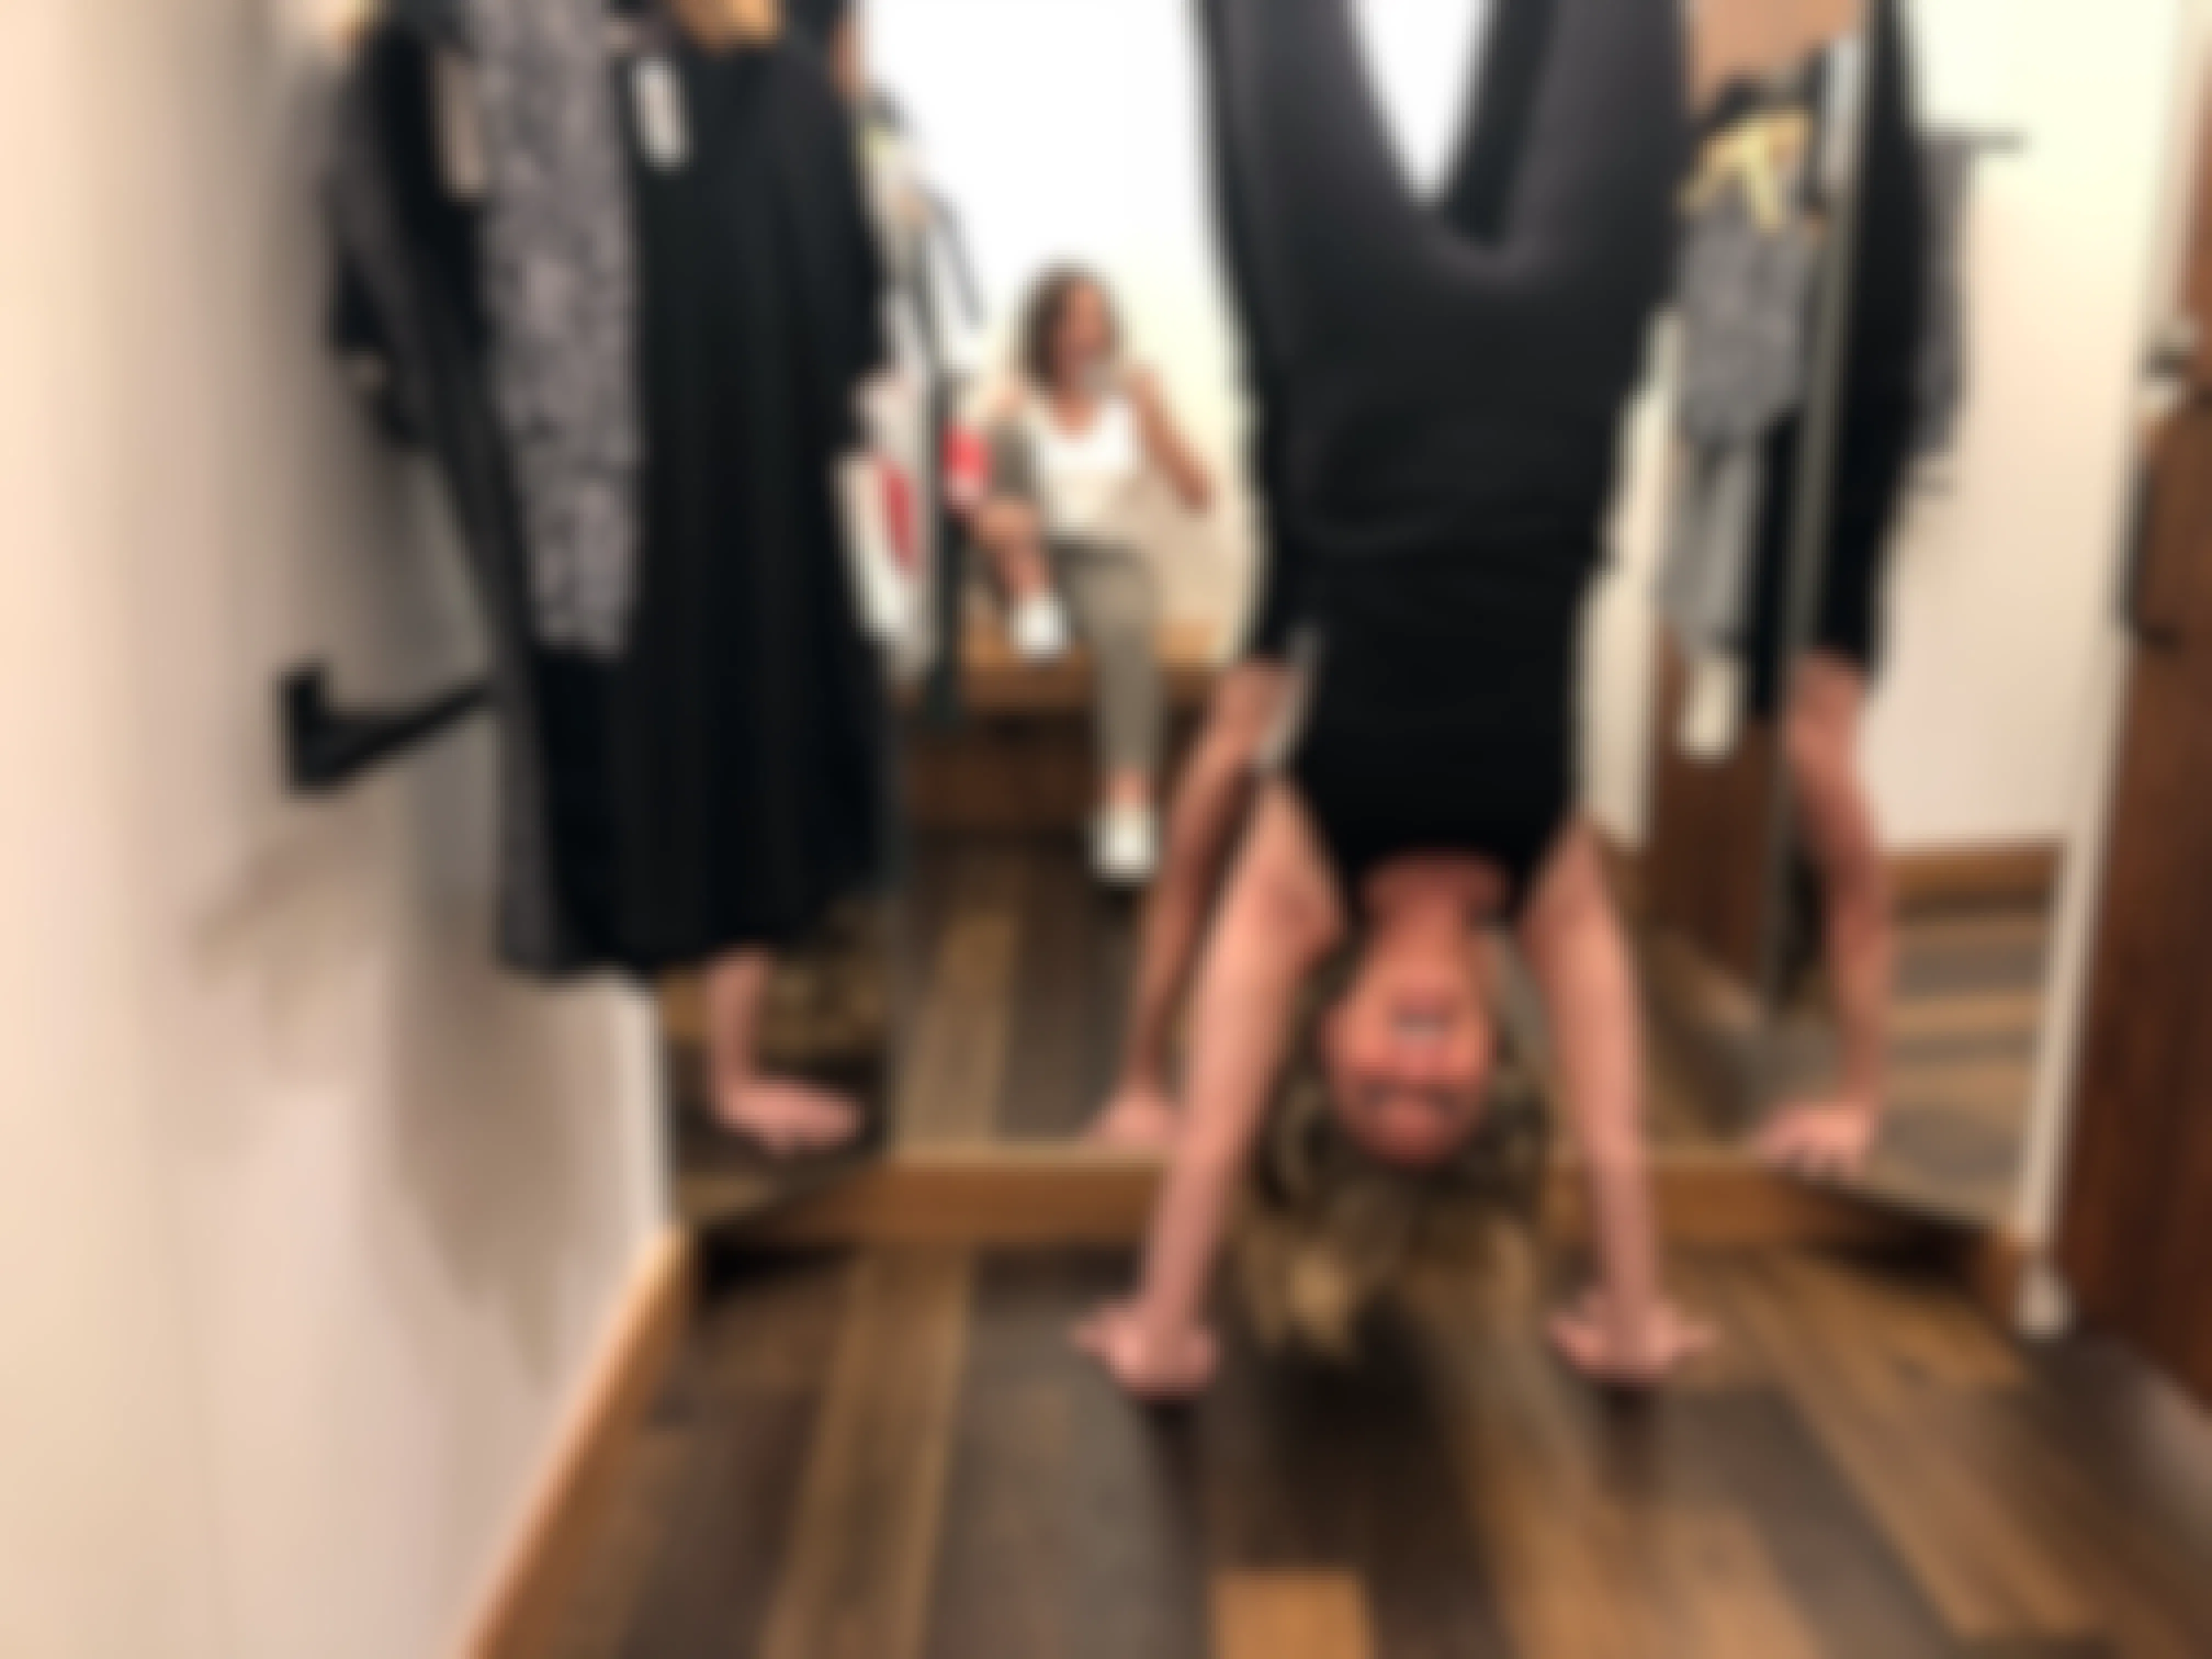 Woman doing a headstand inside the Lululemon fitting room